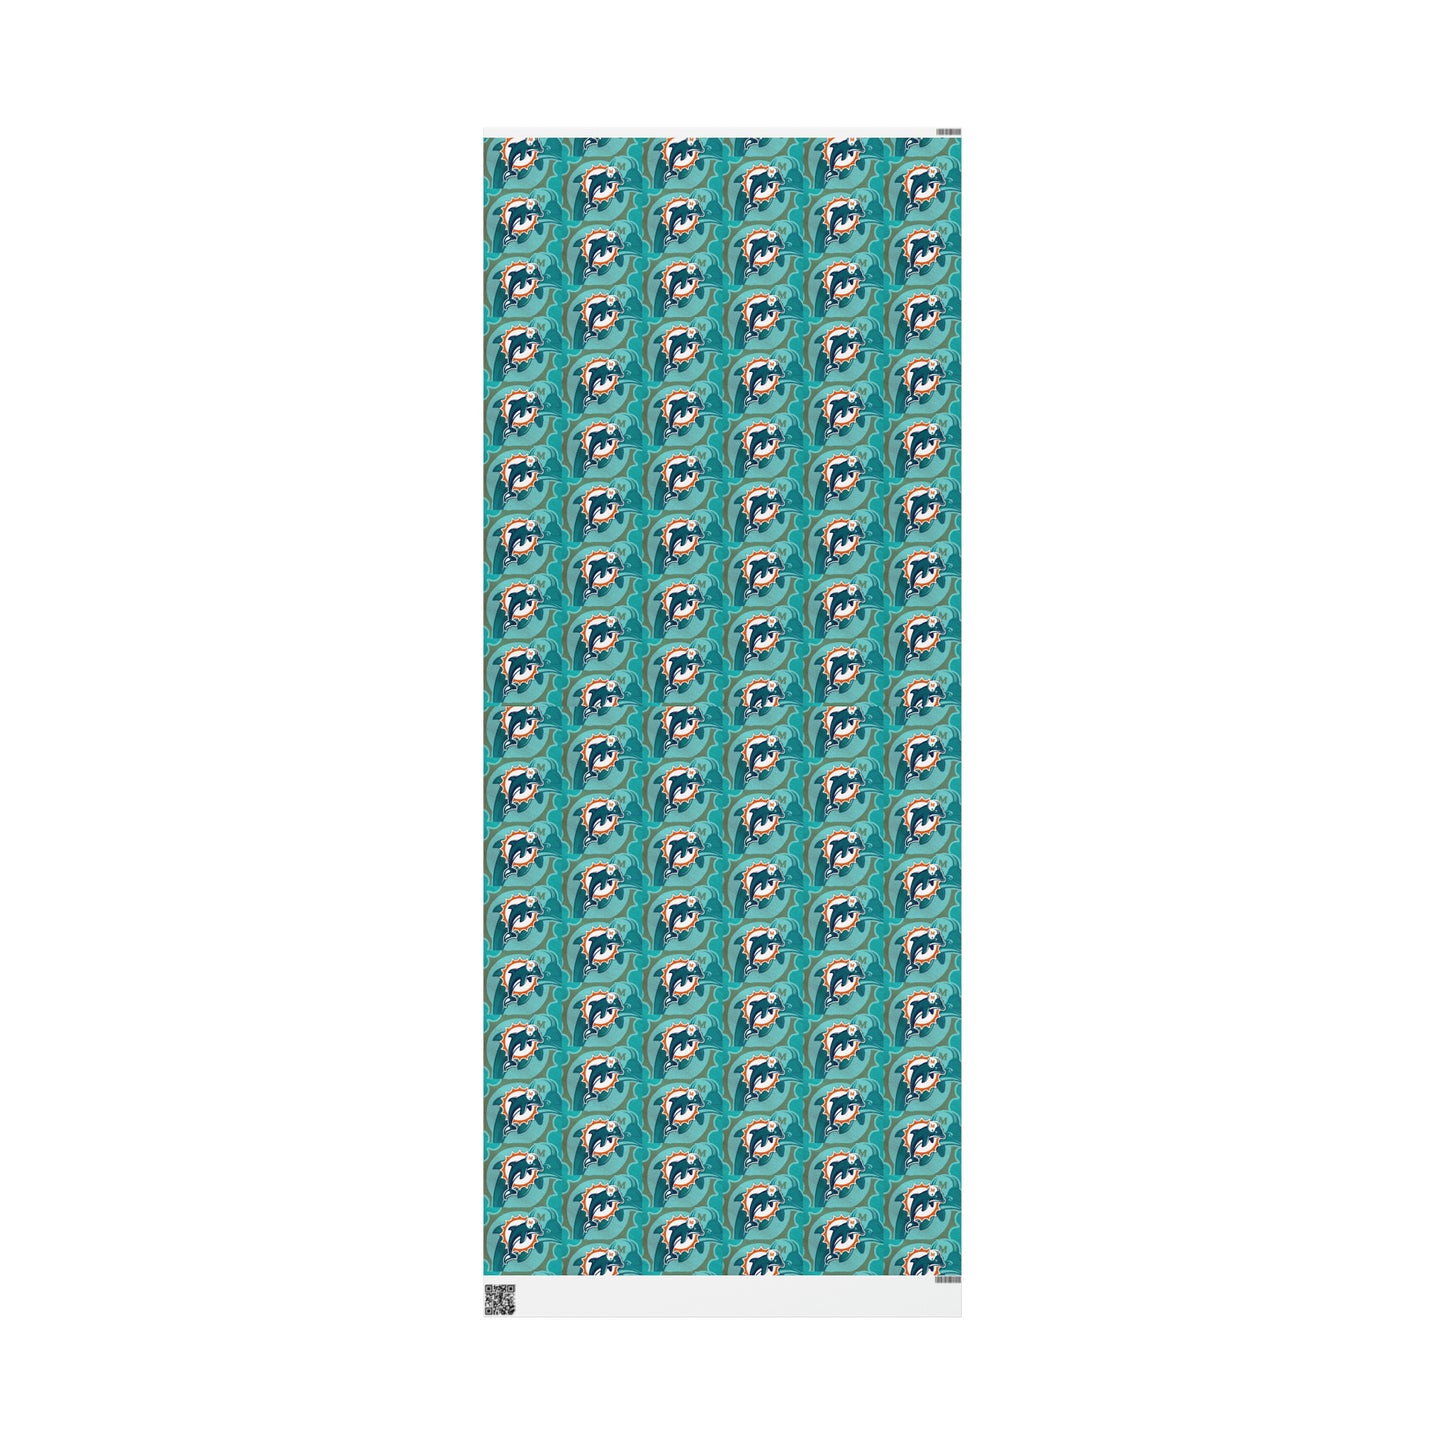 Miami Dolphins Logo NFL Football Birthday Gift Wrapping Paper Holiday